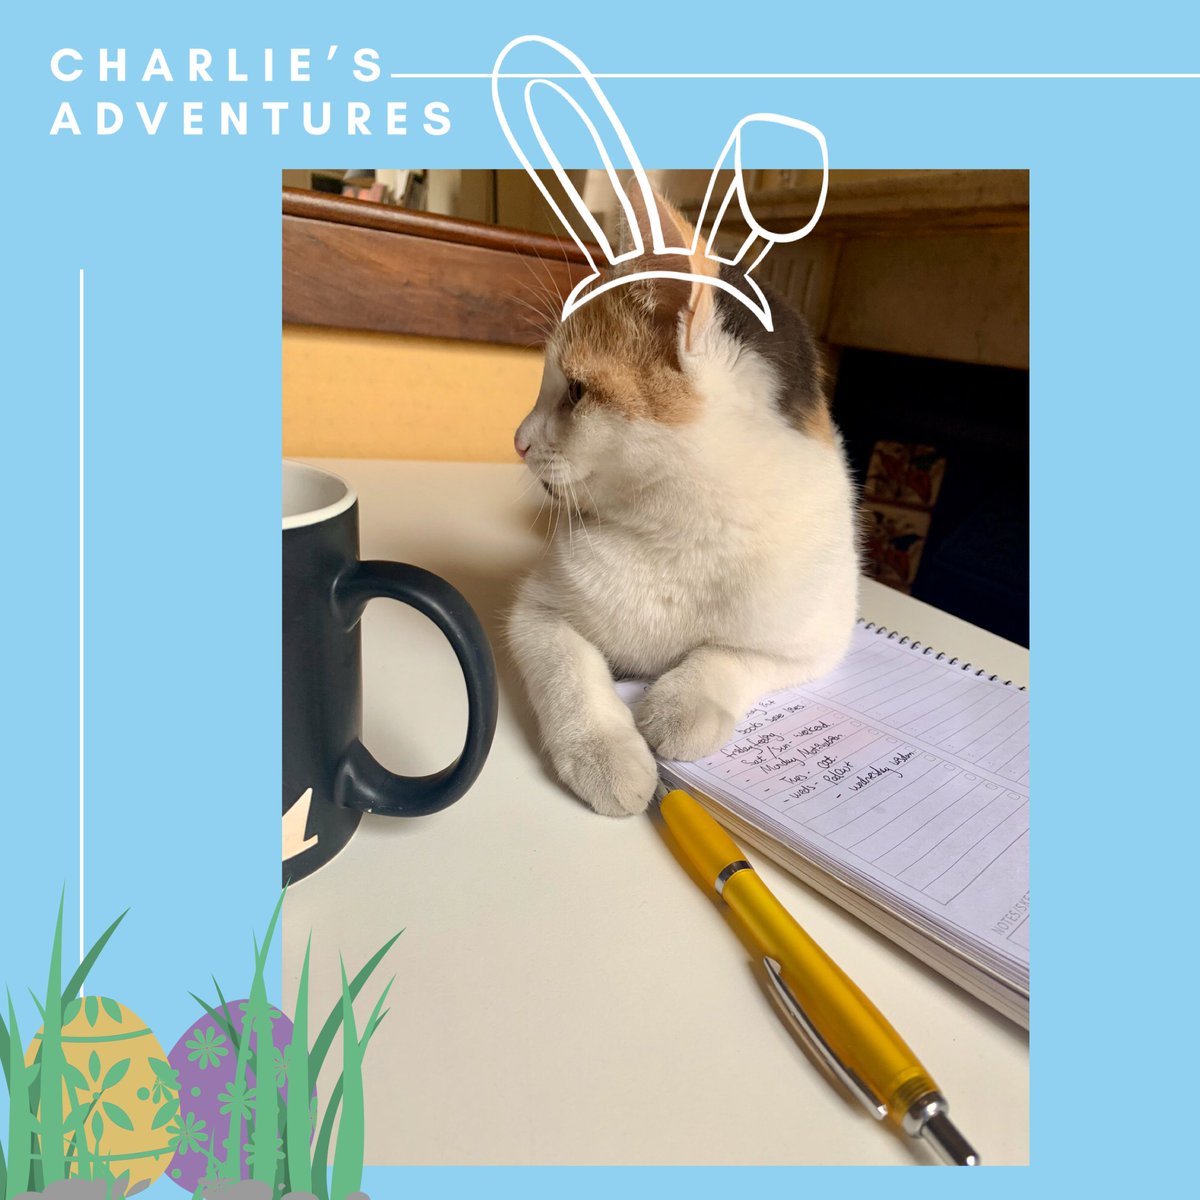 We’ve got a special Easter edition of #CharliesAdventures for you. #CatsinPublishing #CatsOfTwitter  #catsofquarantine #EasterAtHome